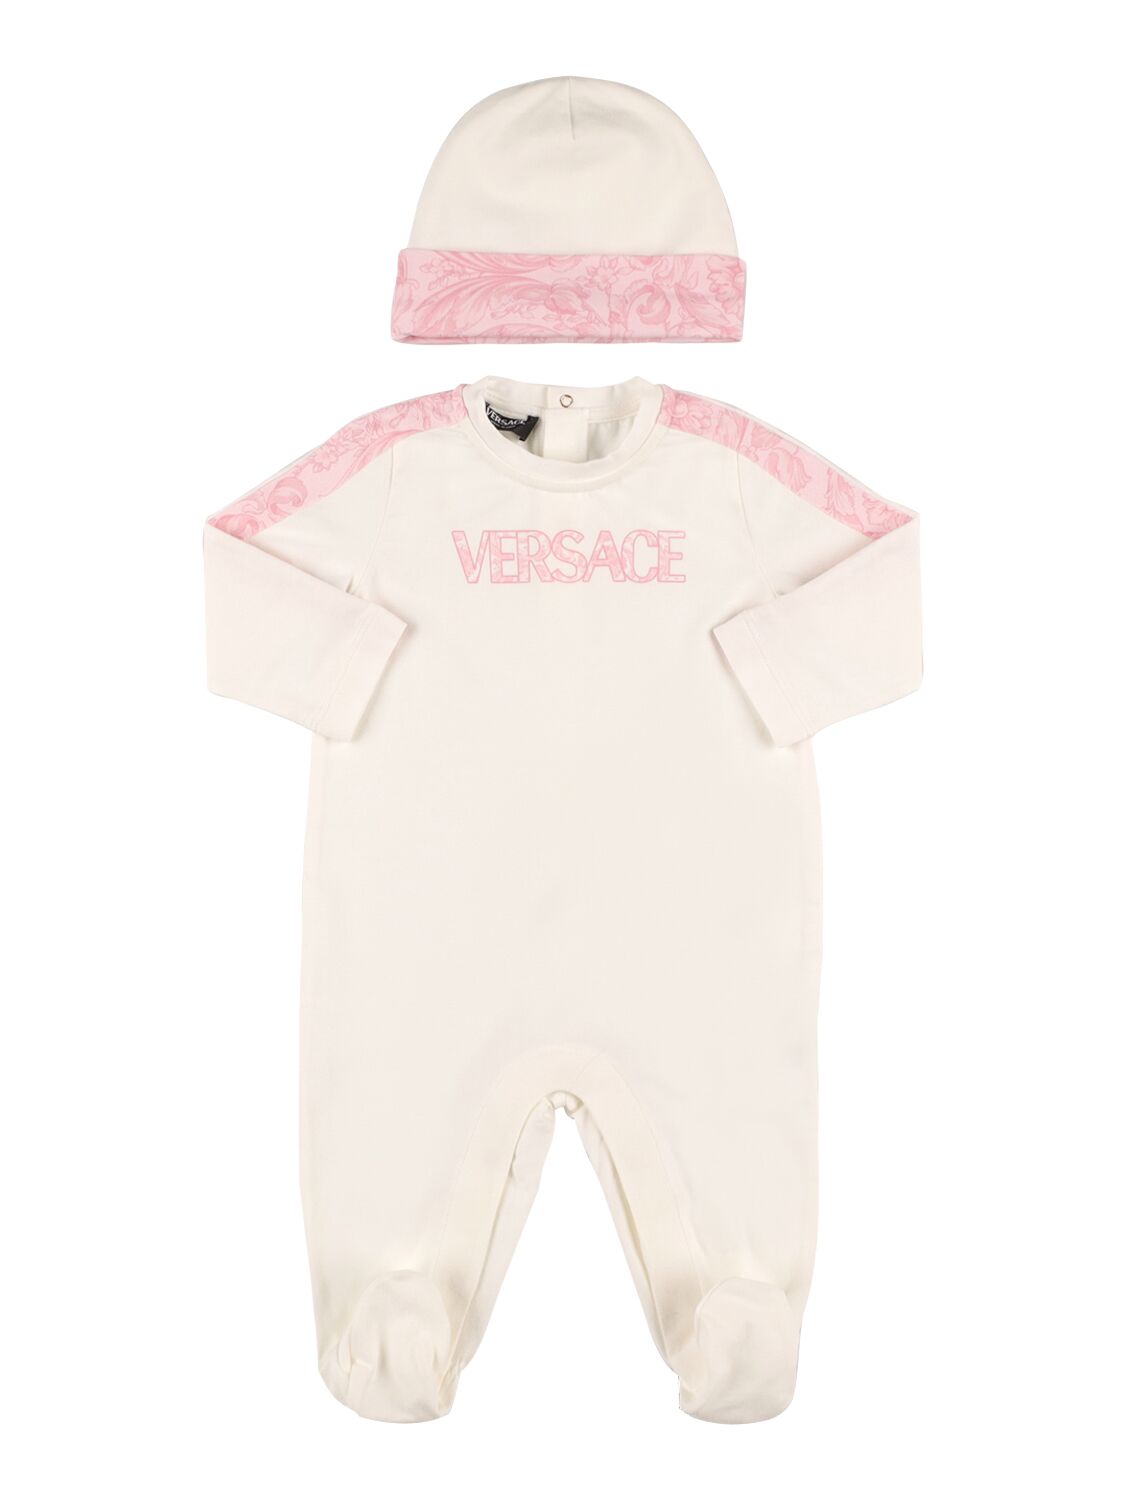 Versace Babies' Printed Cotton Jersey Romper & Hat In White,pink